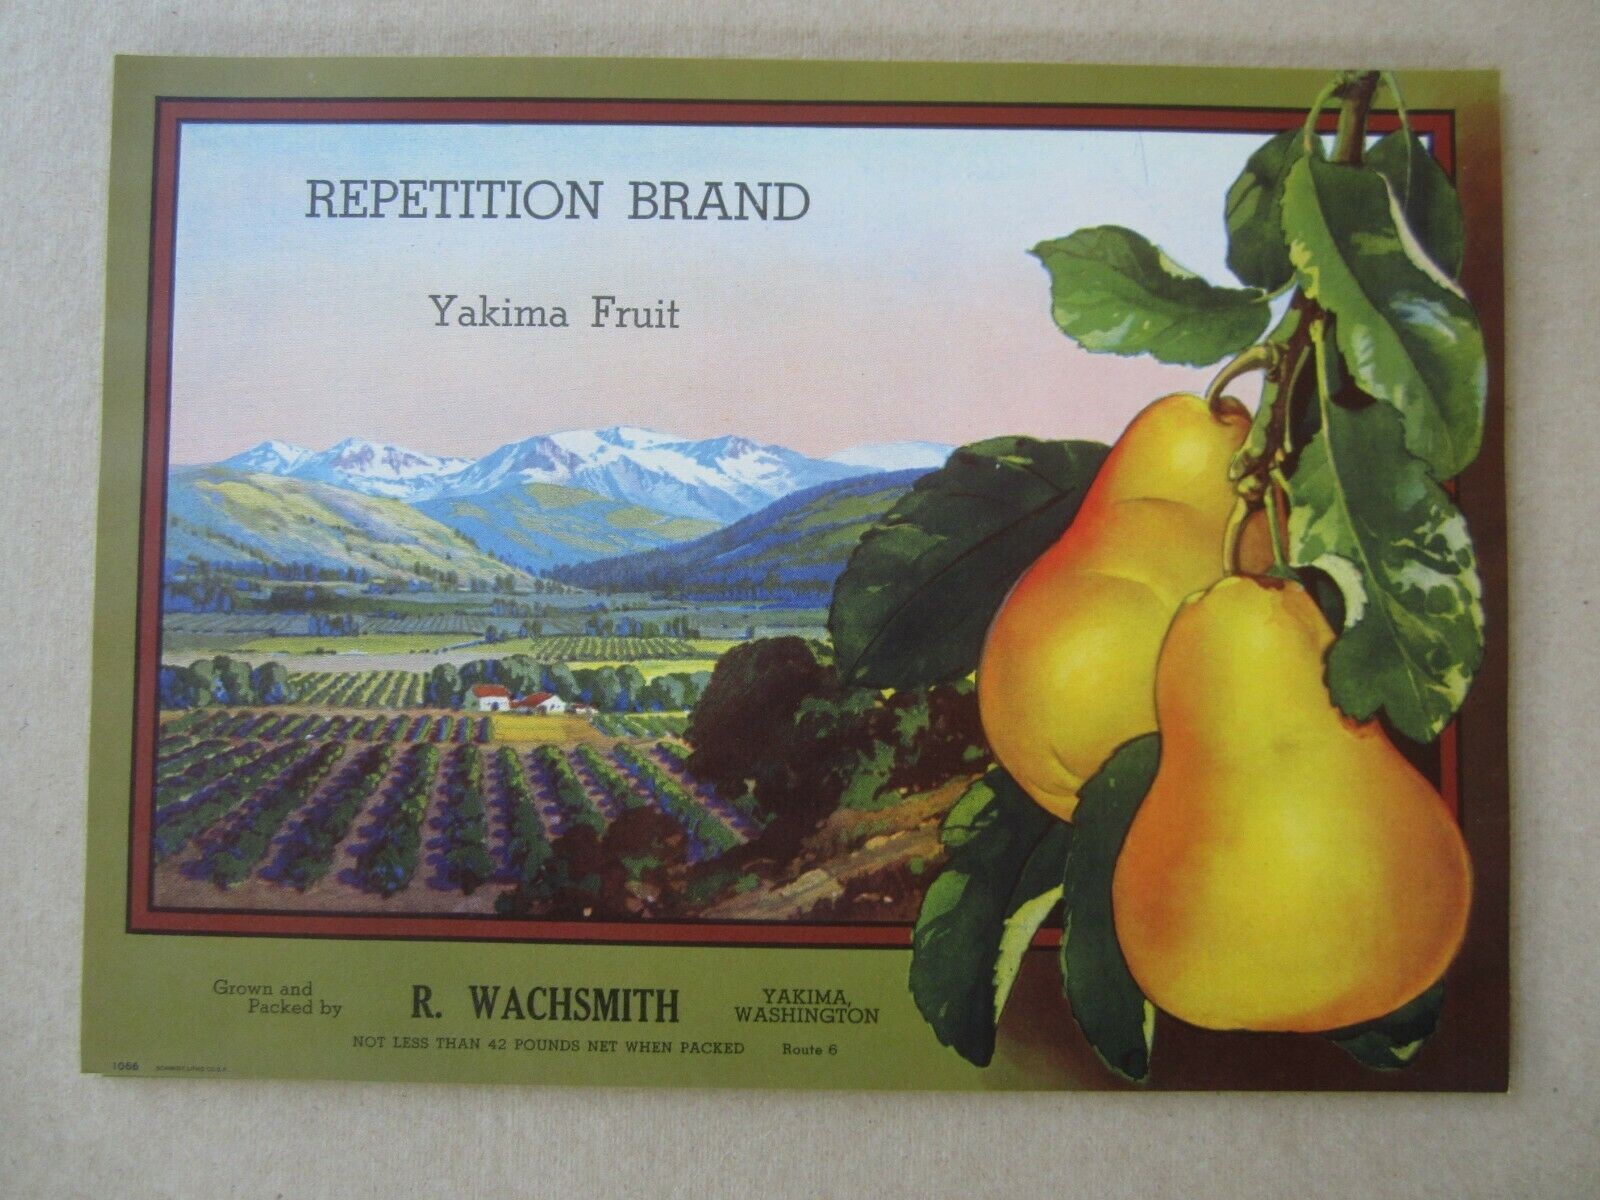  Lot of 50 Old Vintage REPETITION BRAND Pear Cr...